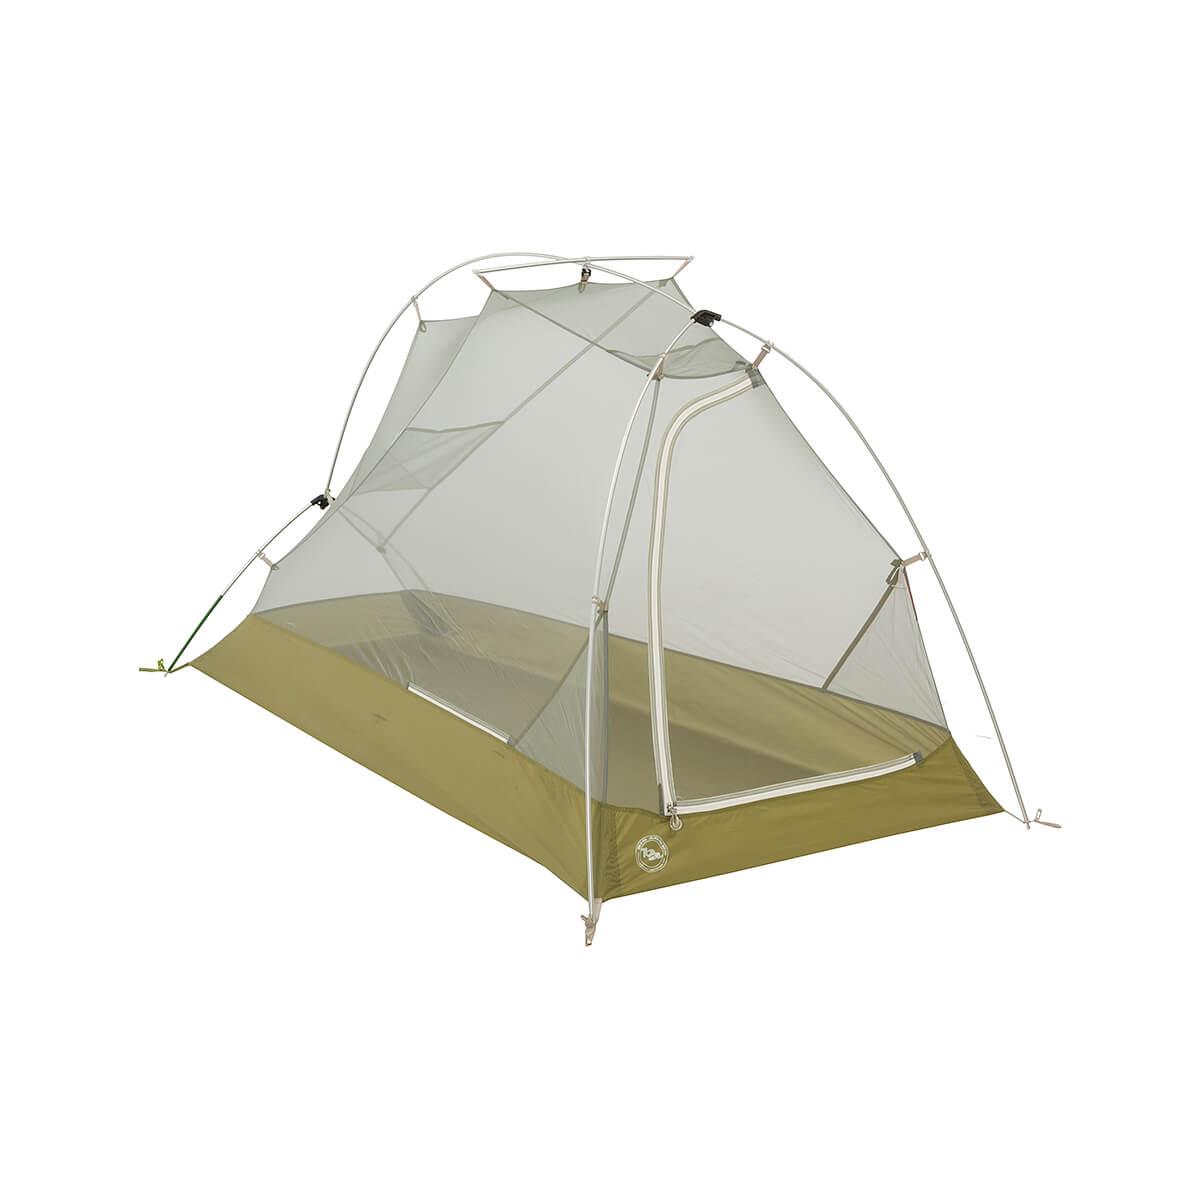  Seedhouse Sl Tent - 1- Person